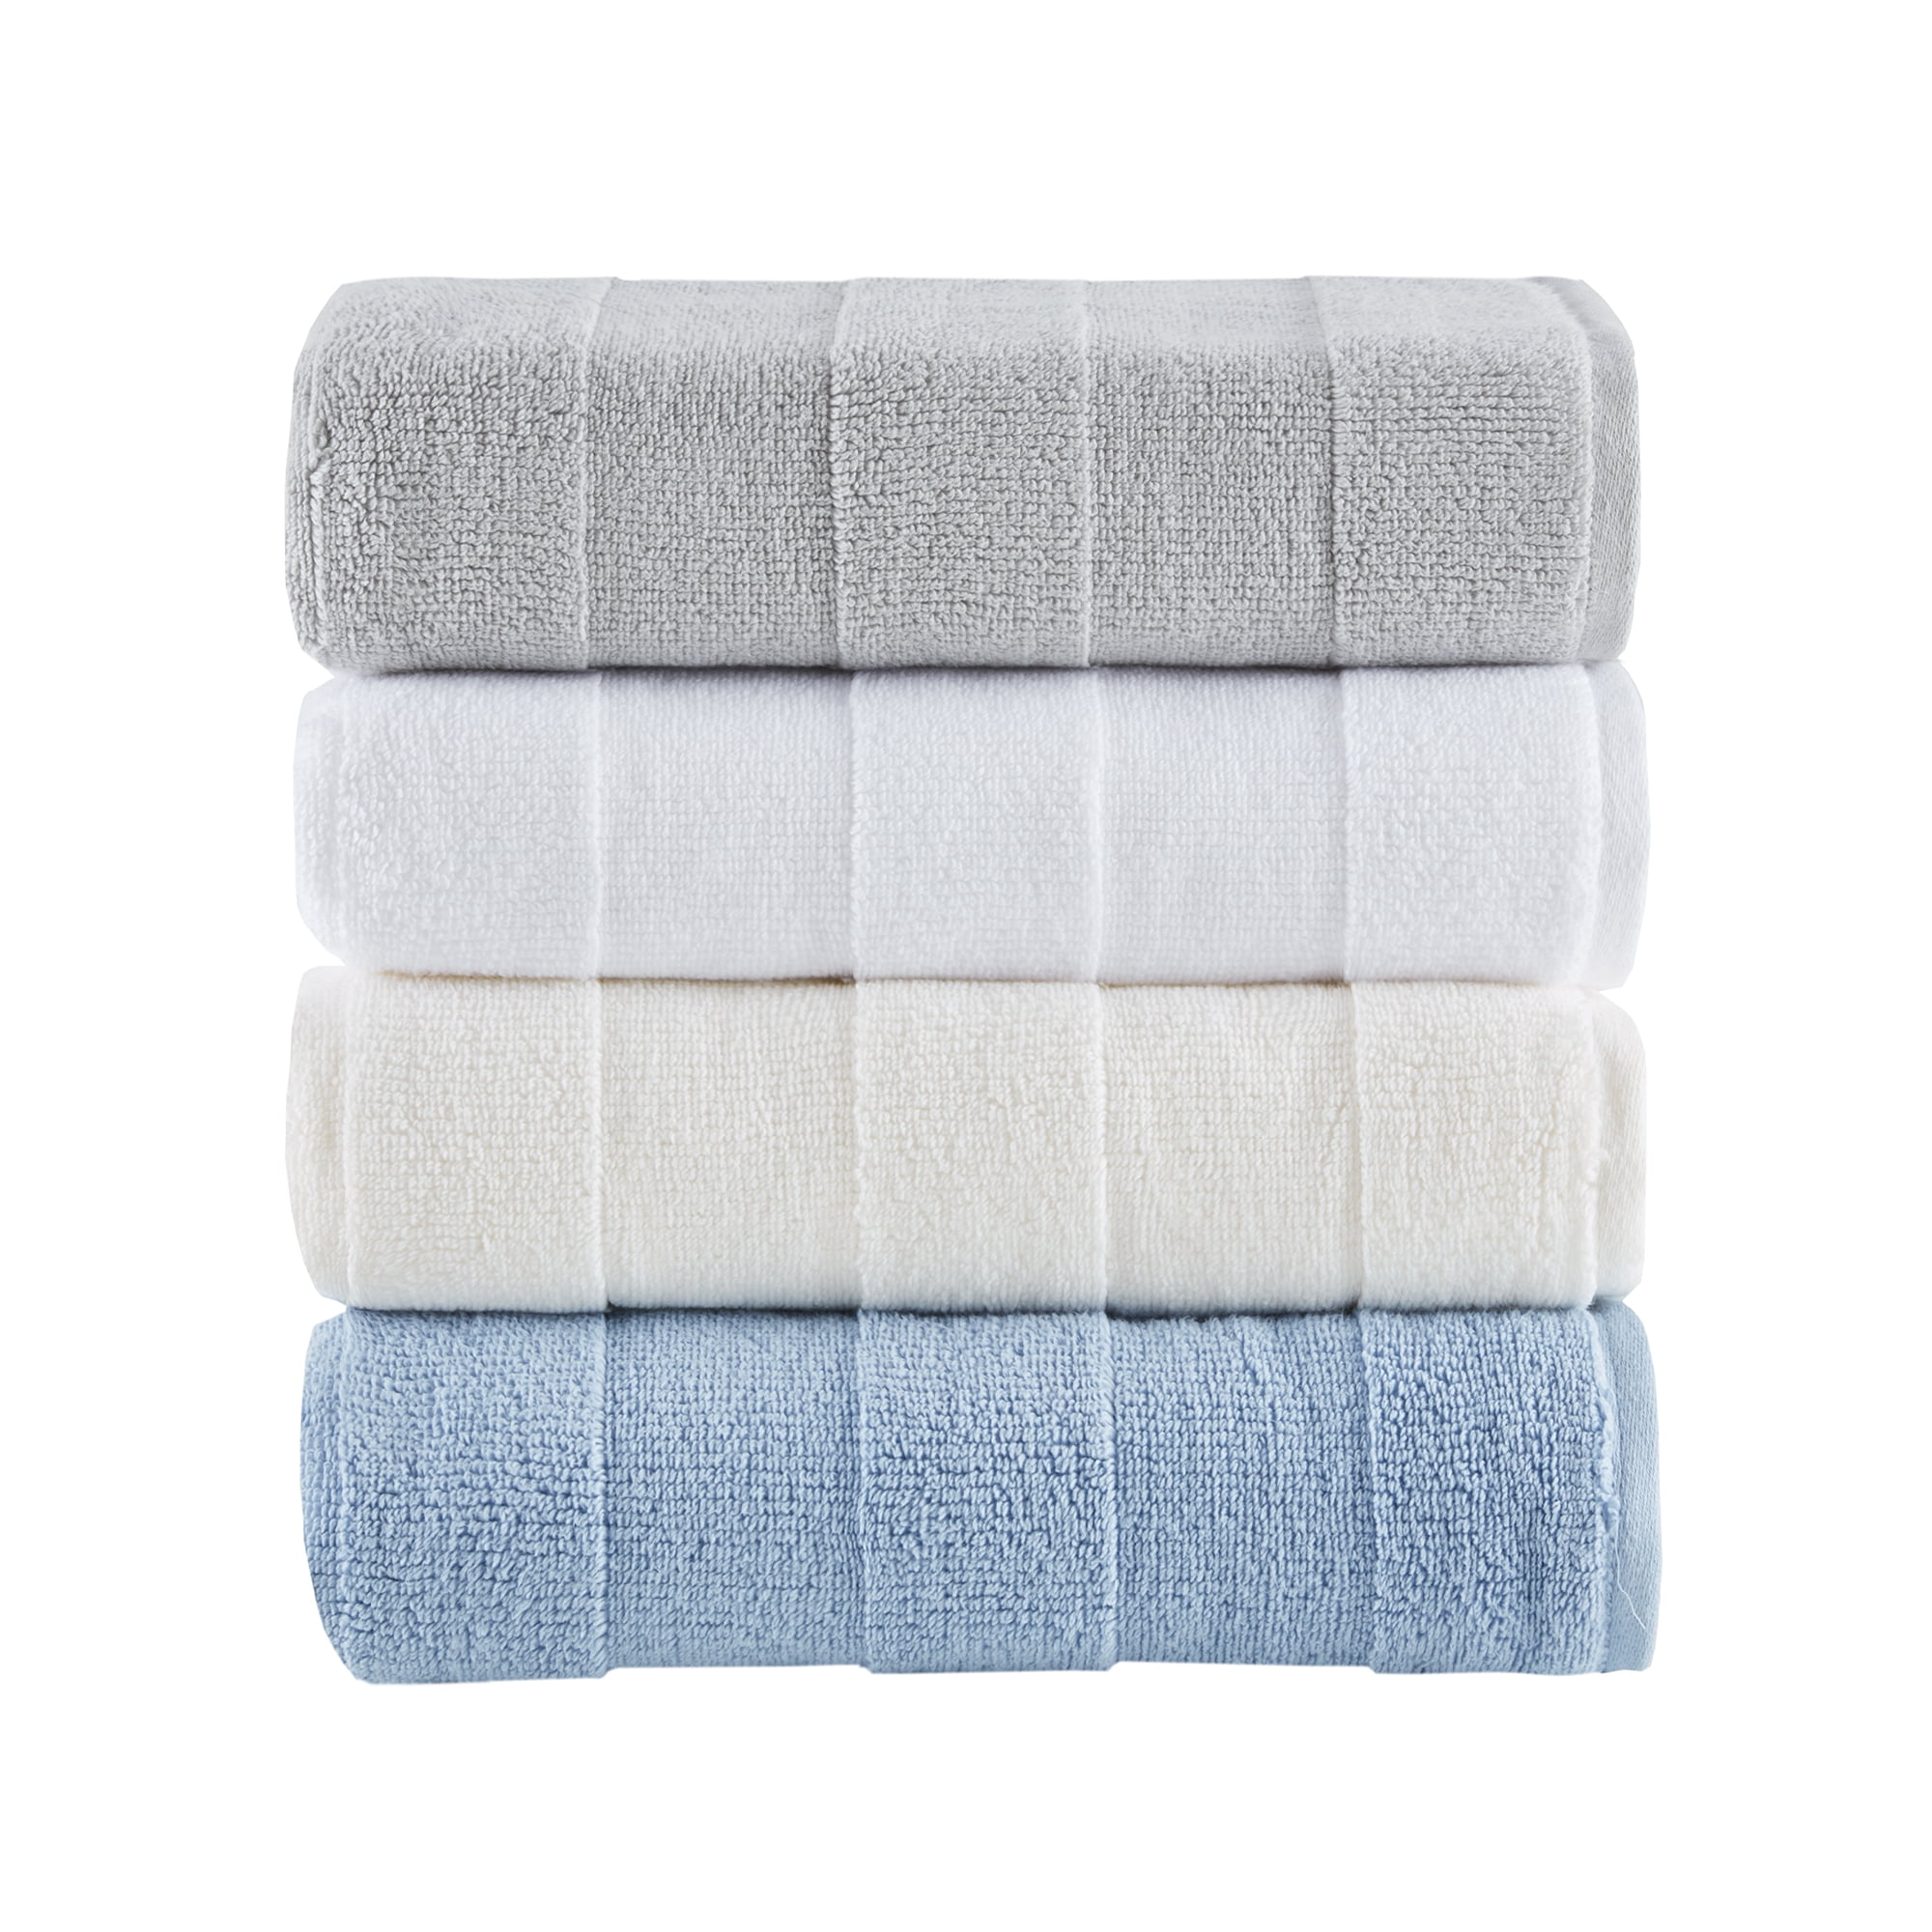 This Set of 6 Towels Is on Sale for 30% Off at